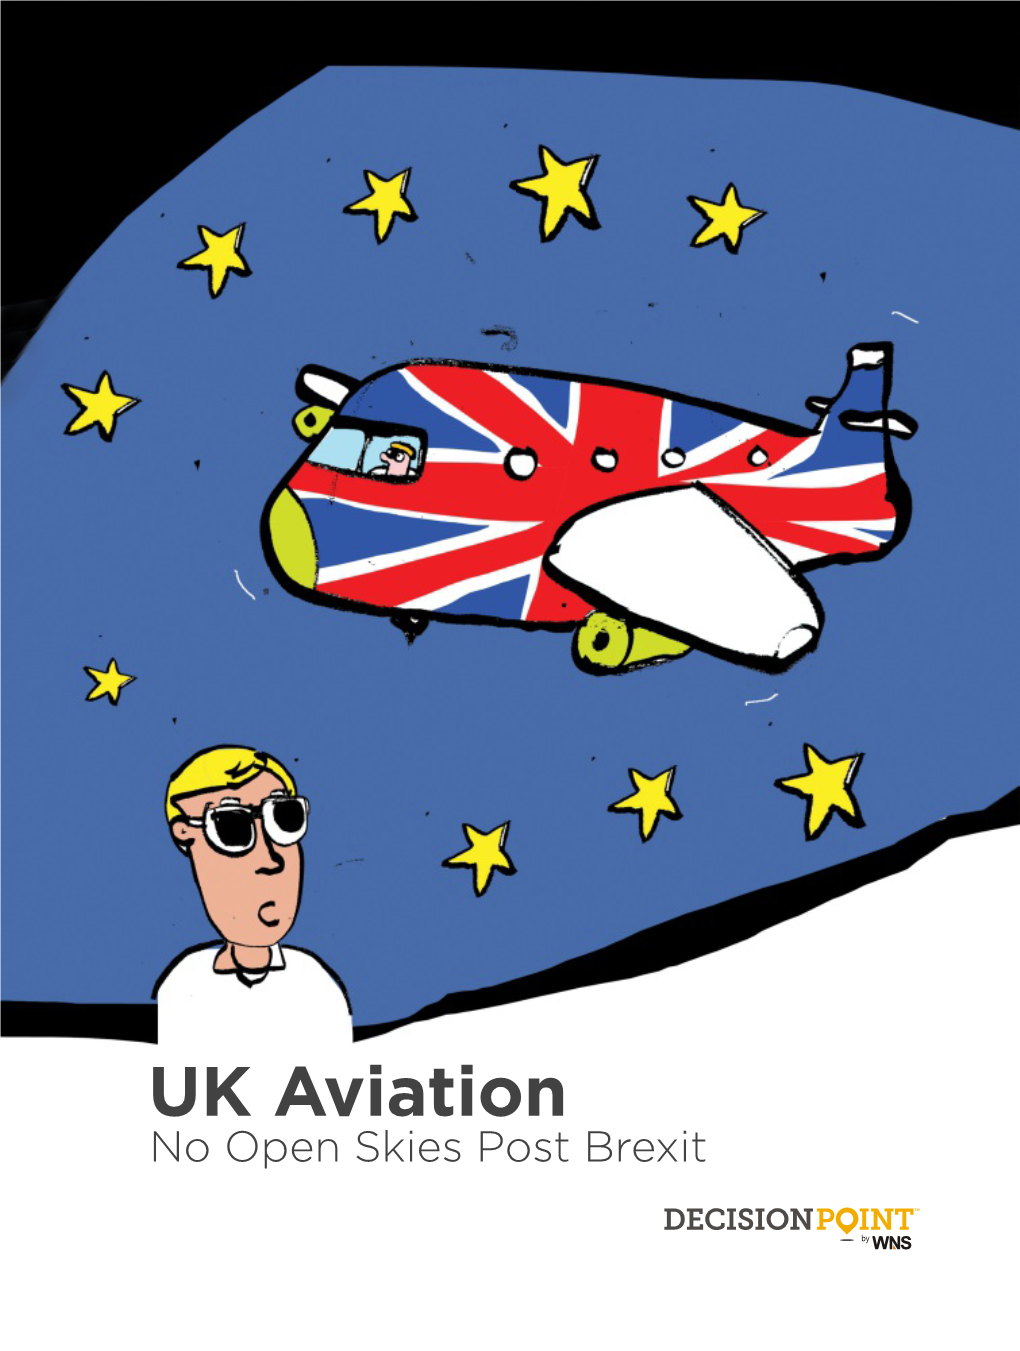 UK Aviation: No Open Skies Post Brexit|Brexit| WNS Decisionpoint